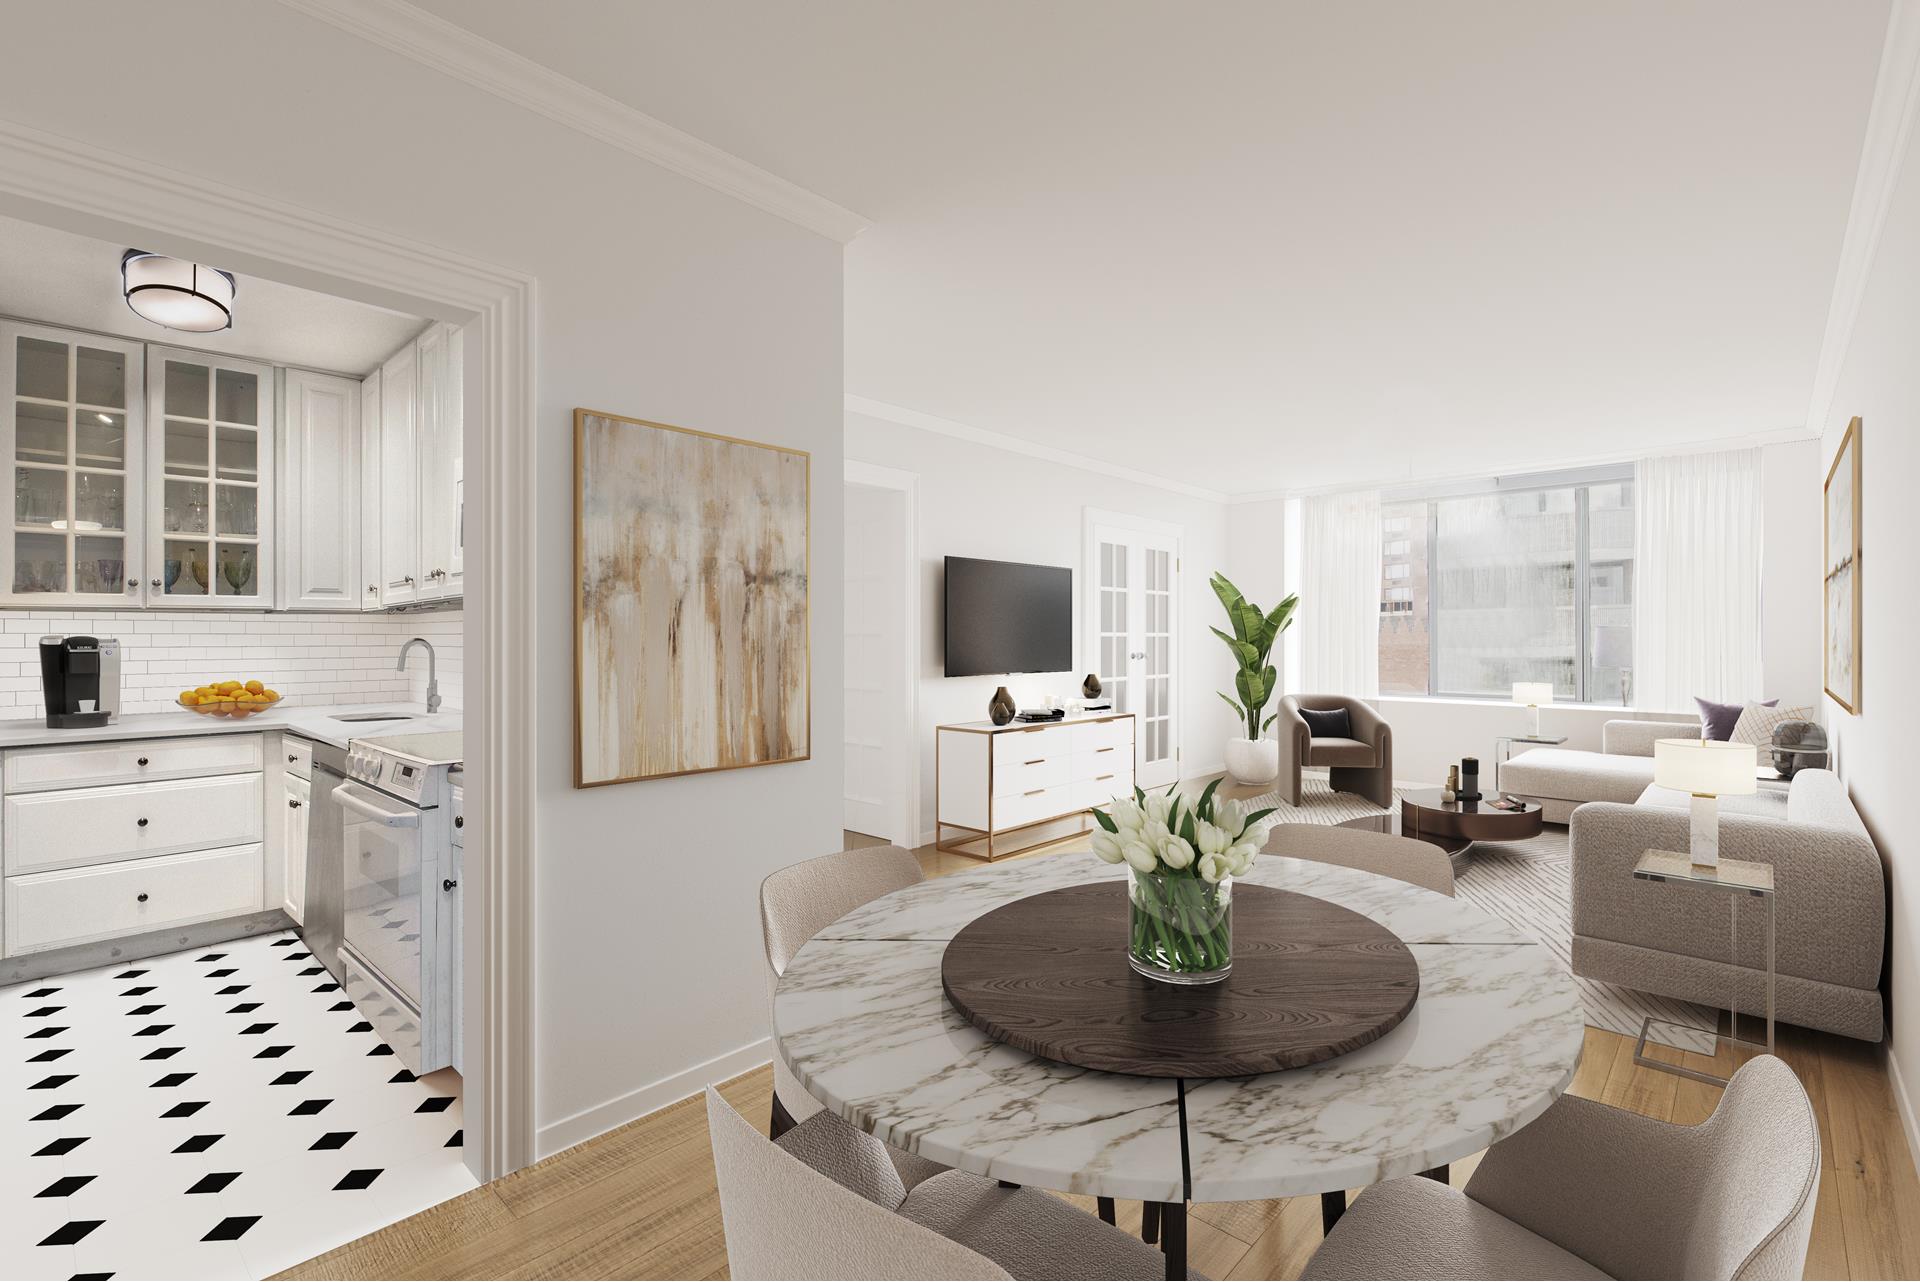 61 West 62nd Street 26G, Lincoln Sq, Upper West Side, NYC - 2 Bedrooms  
2 Bathrooms  
4 Rooms - 